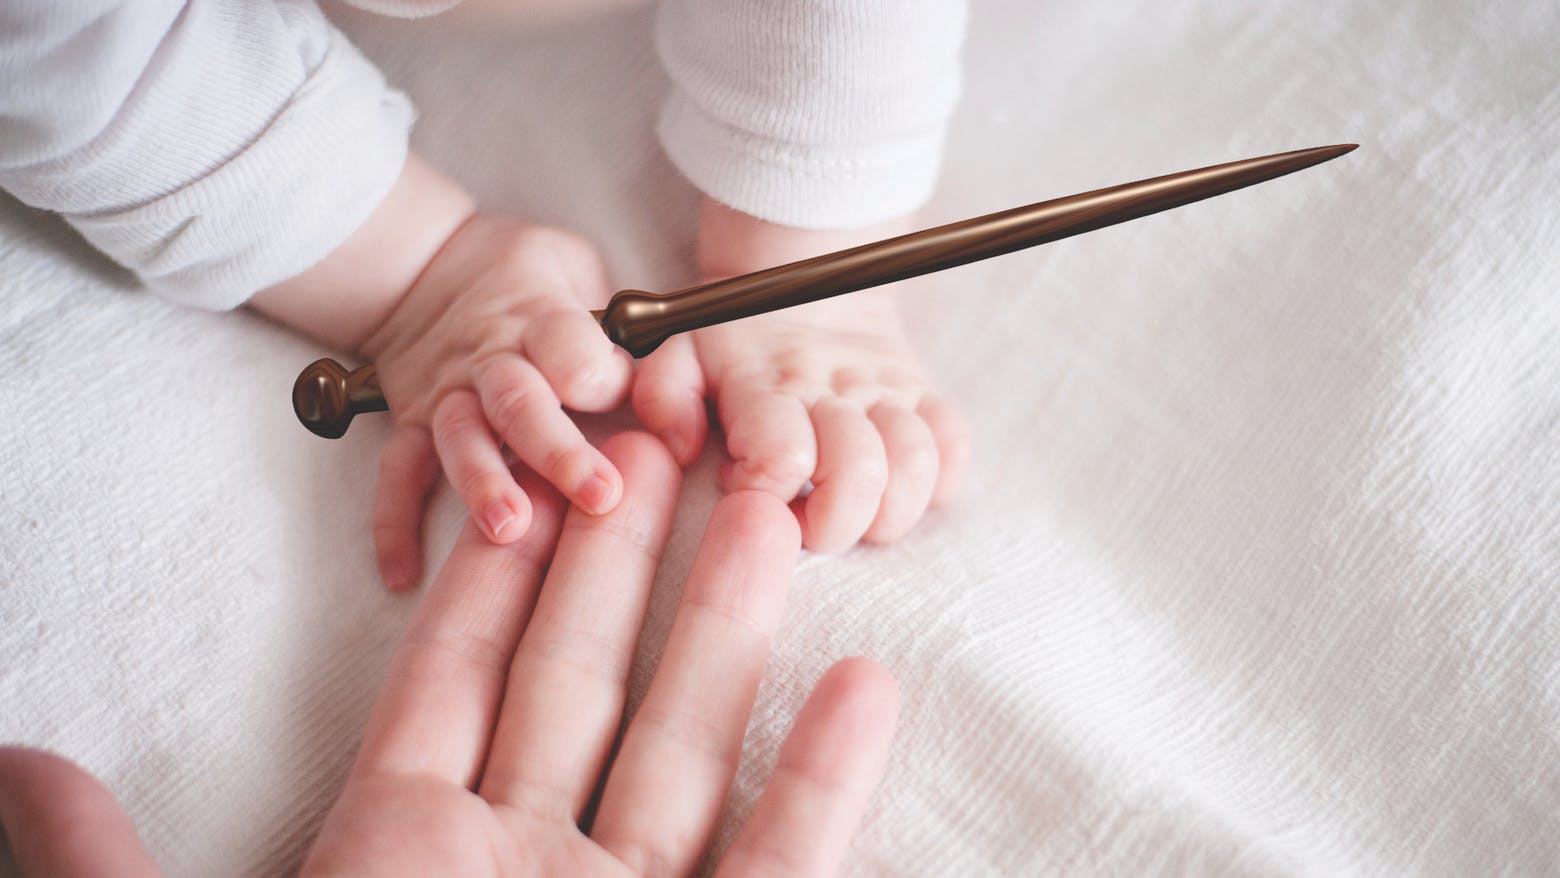 A baby holding a magic wand